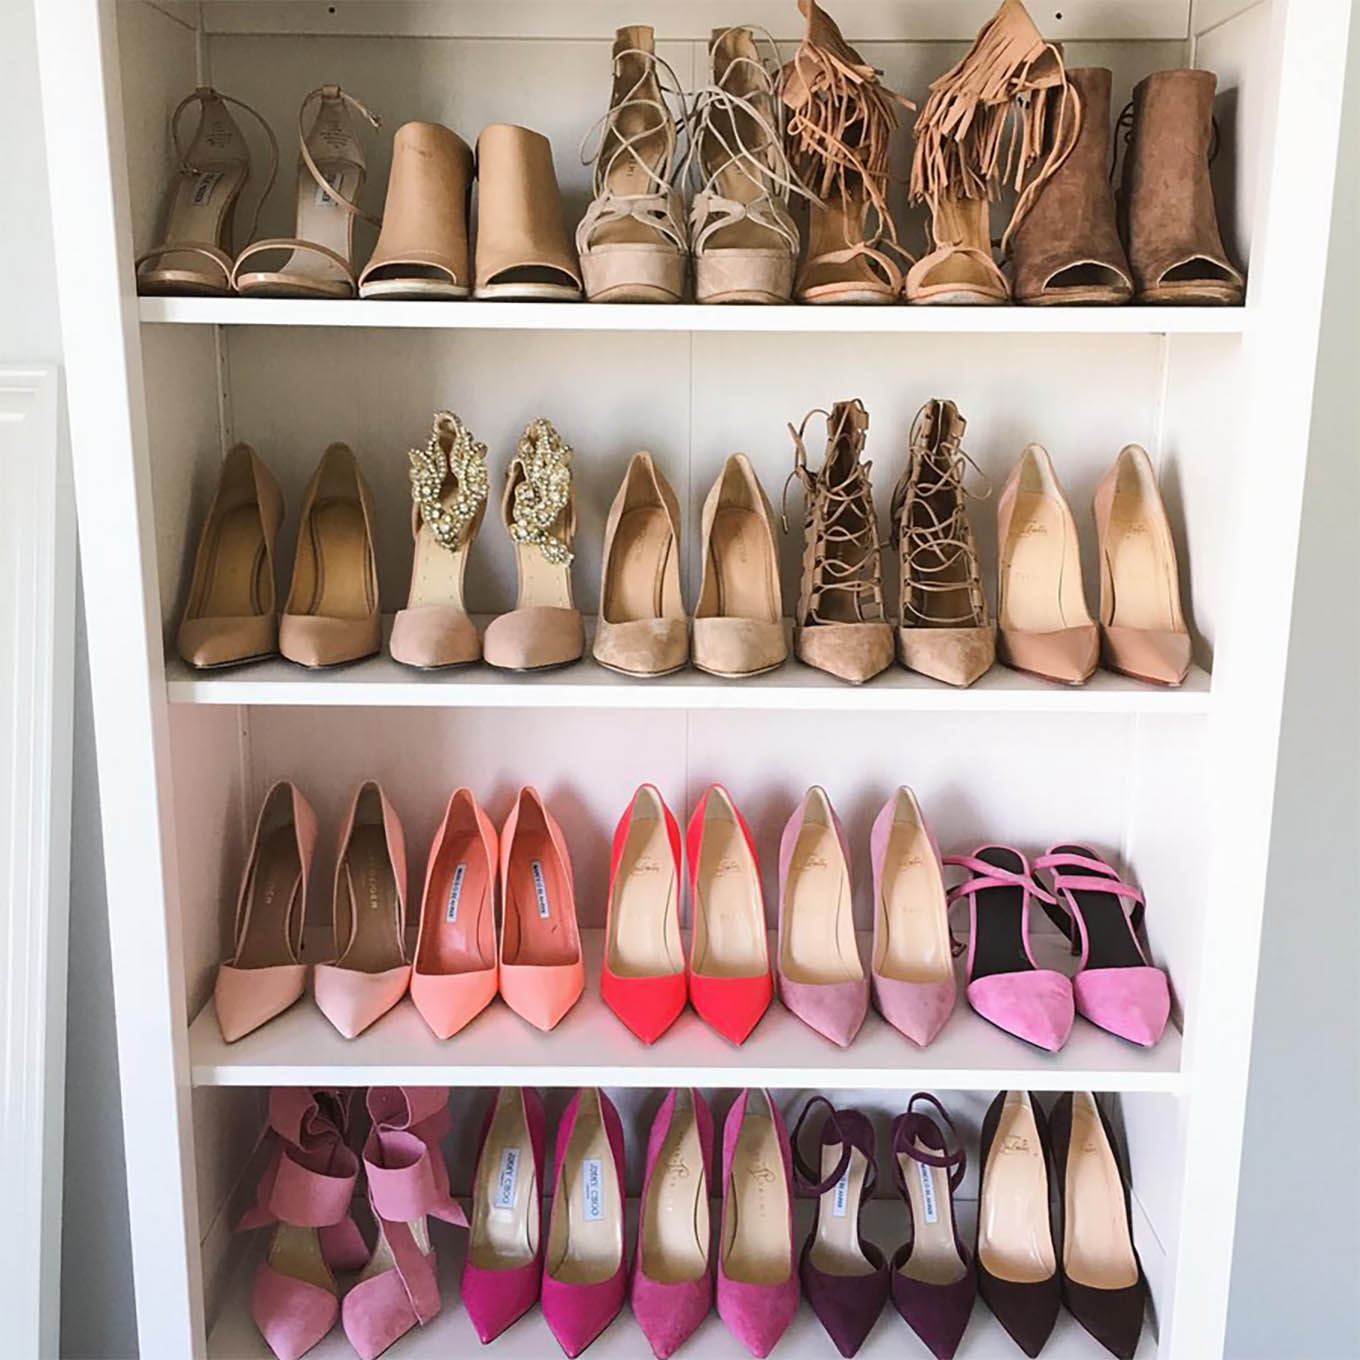 Nude and pink pumps